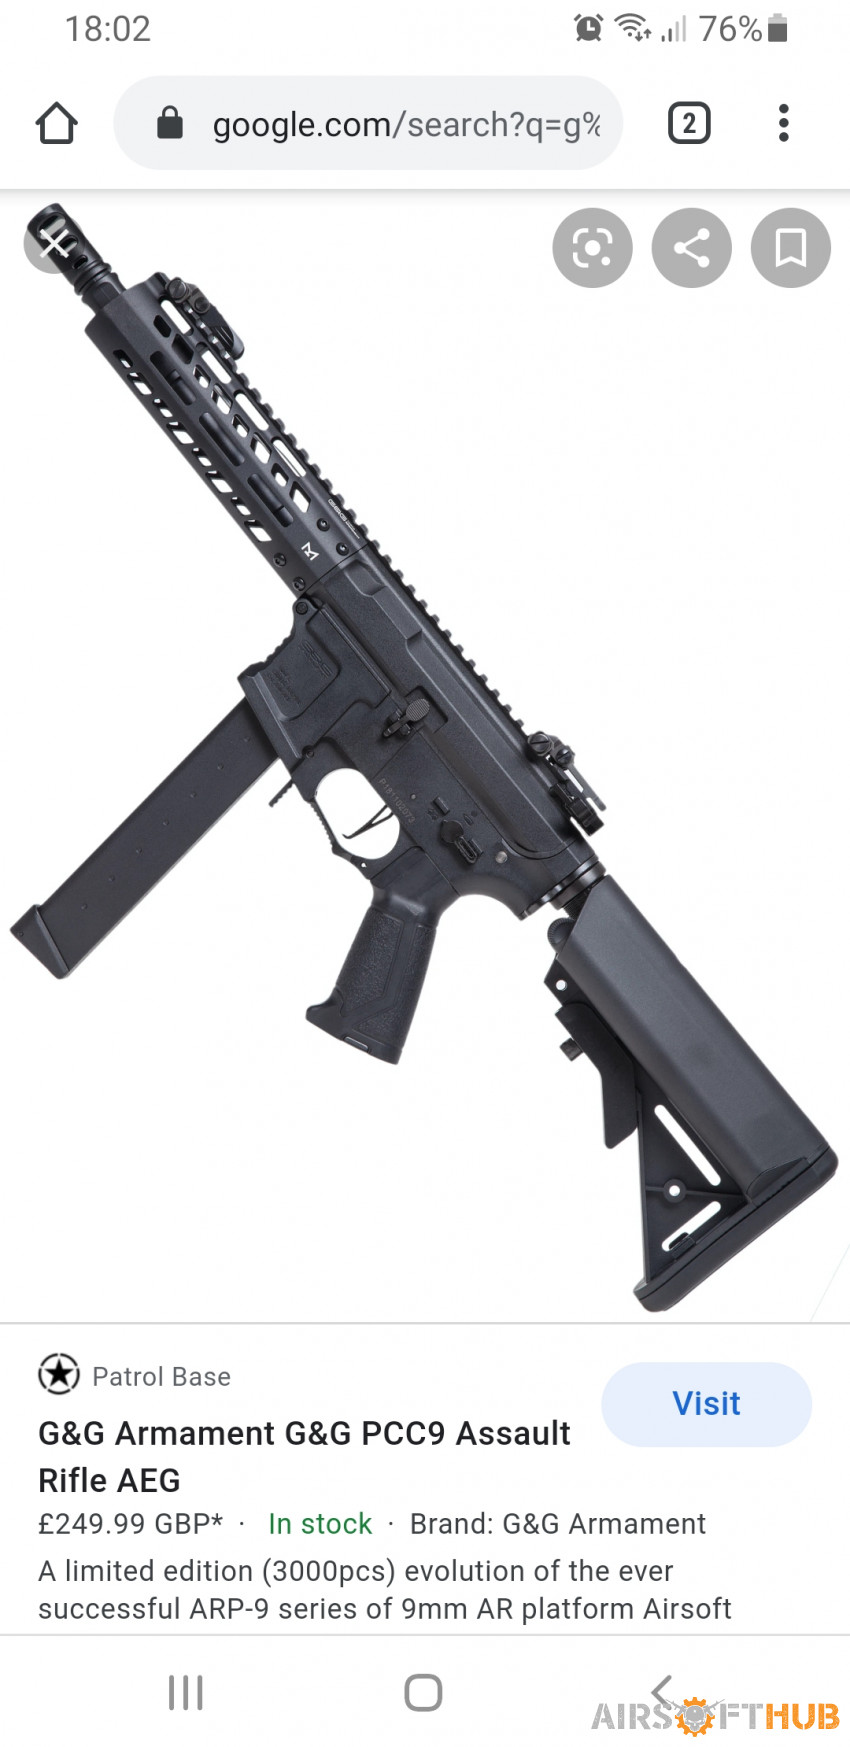 G&g pcc9. Wanted - Used airsoft equipment